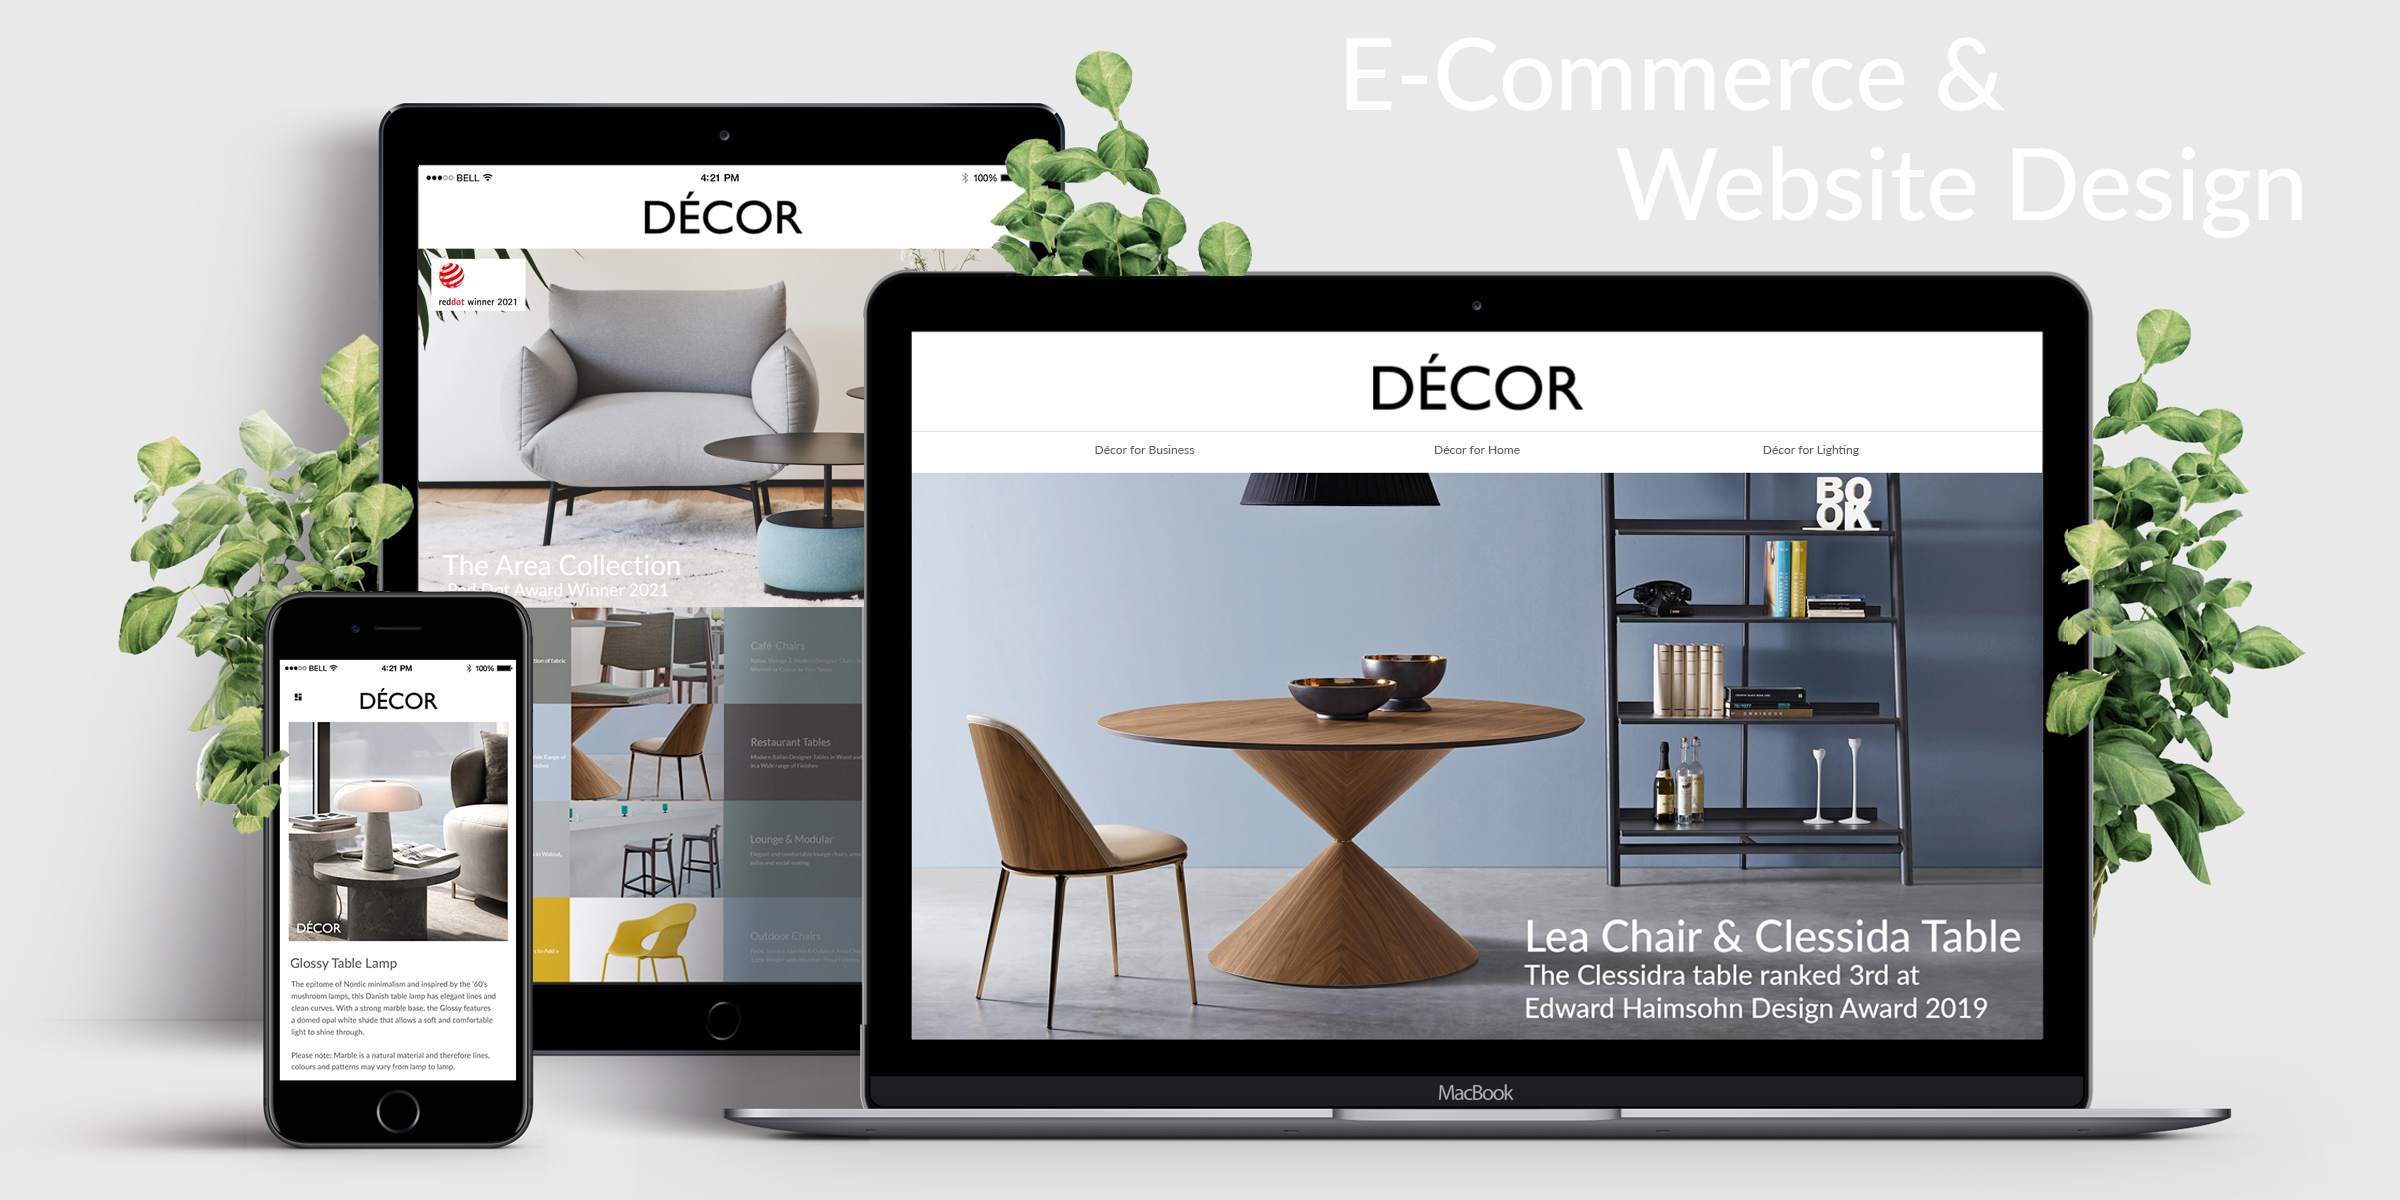 E-Commerce-and-Website-Design-Home-Large-New-Logos